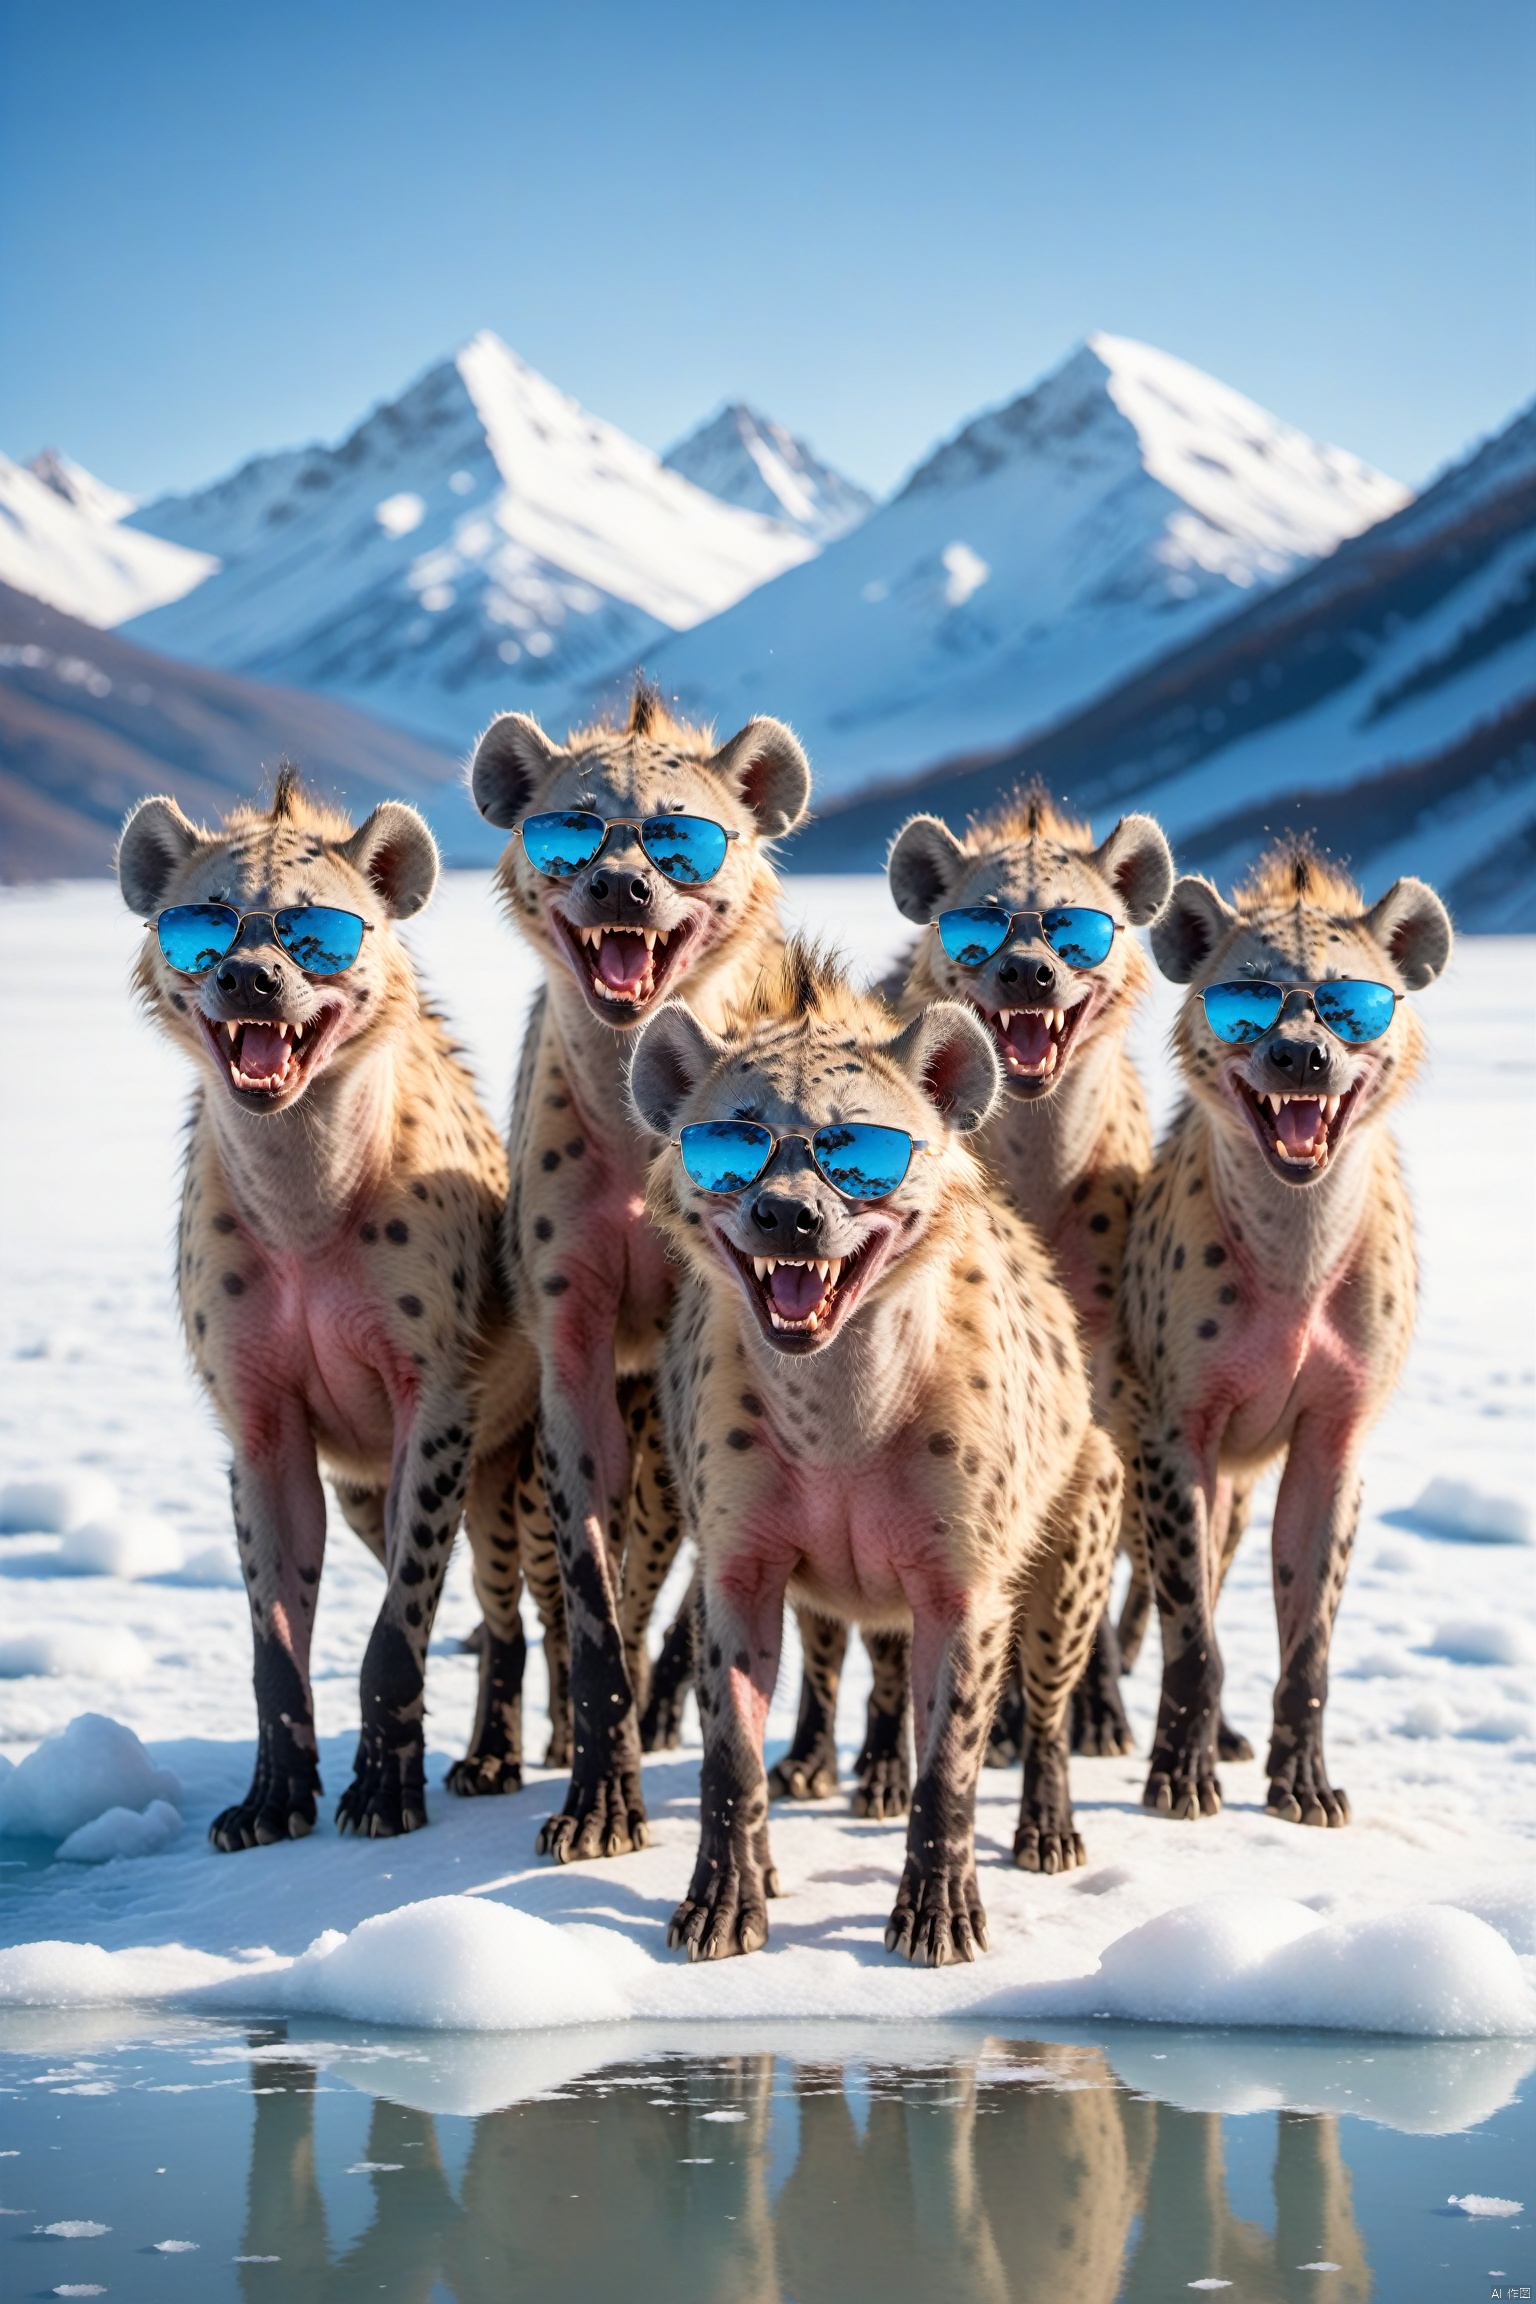  A pack of hyenas in stylish sunglasses, surprised, cute, laughing, outdoors, sky, day, blue sky, no humans, scenery, snow, reflection, ice, mountain, motion blur, lake, frozen